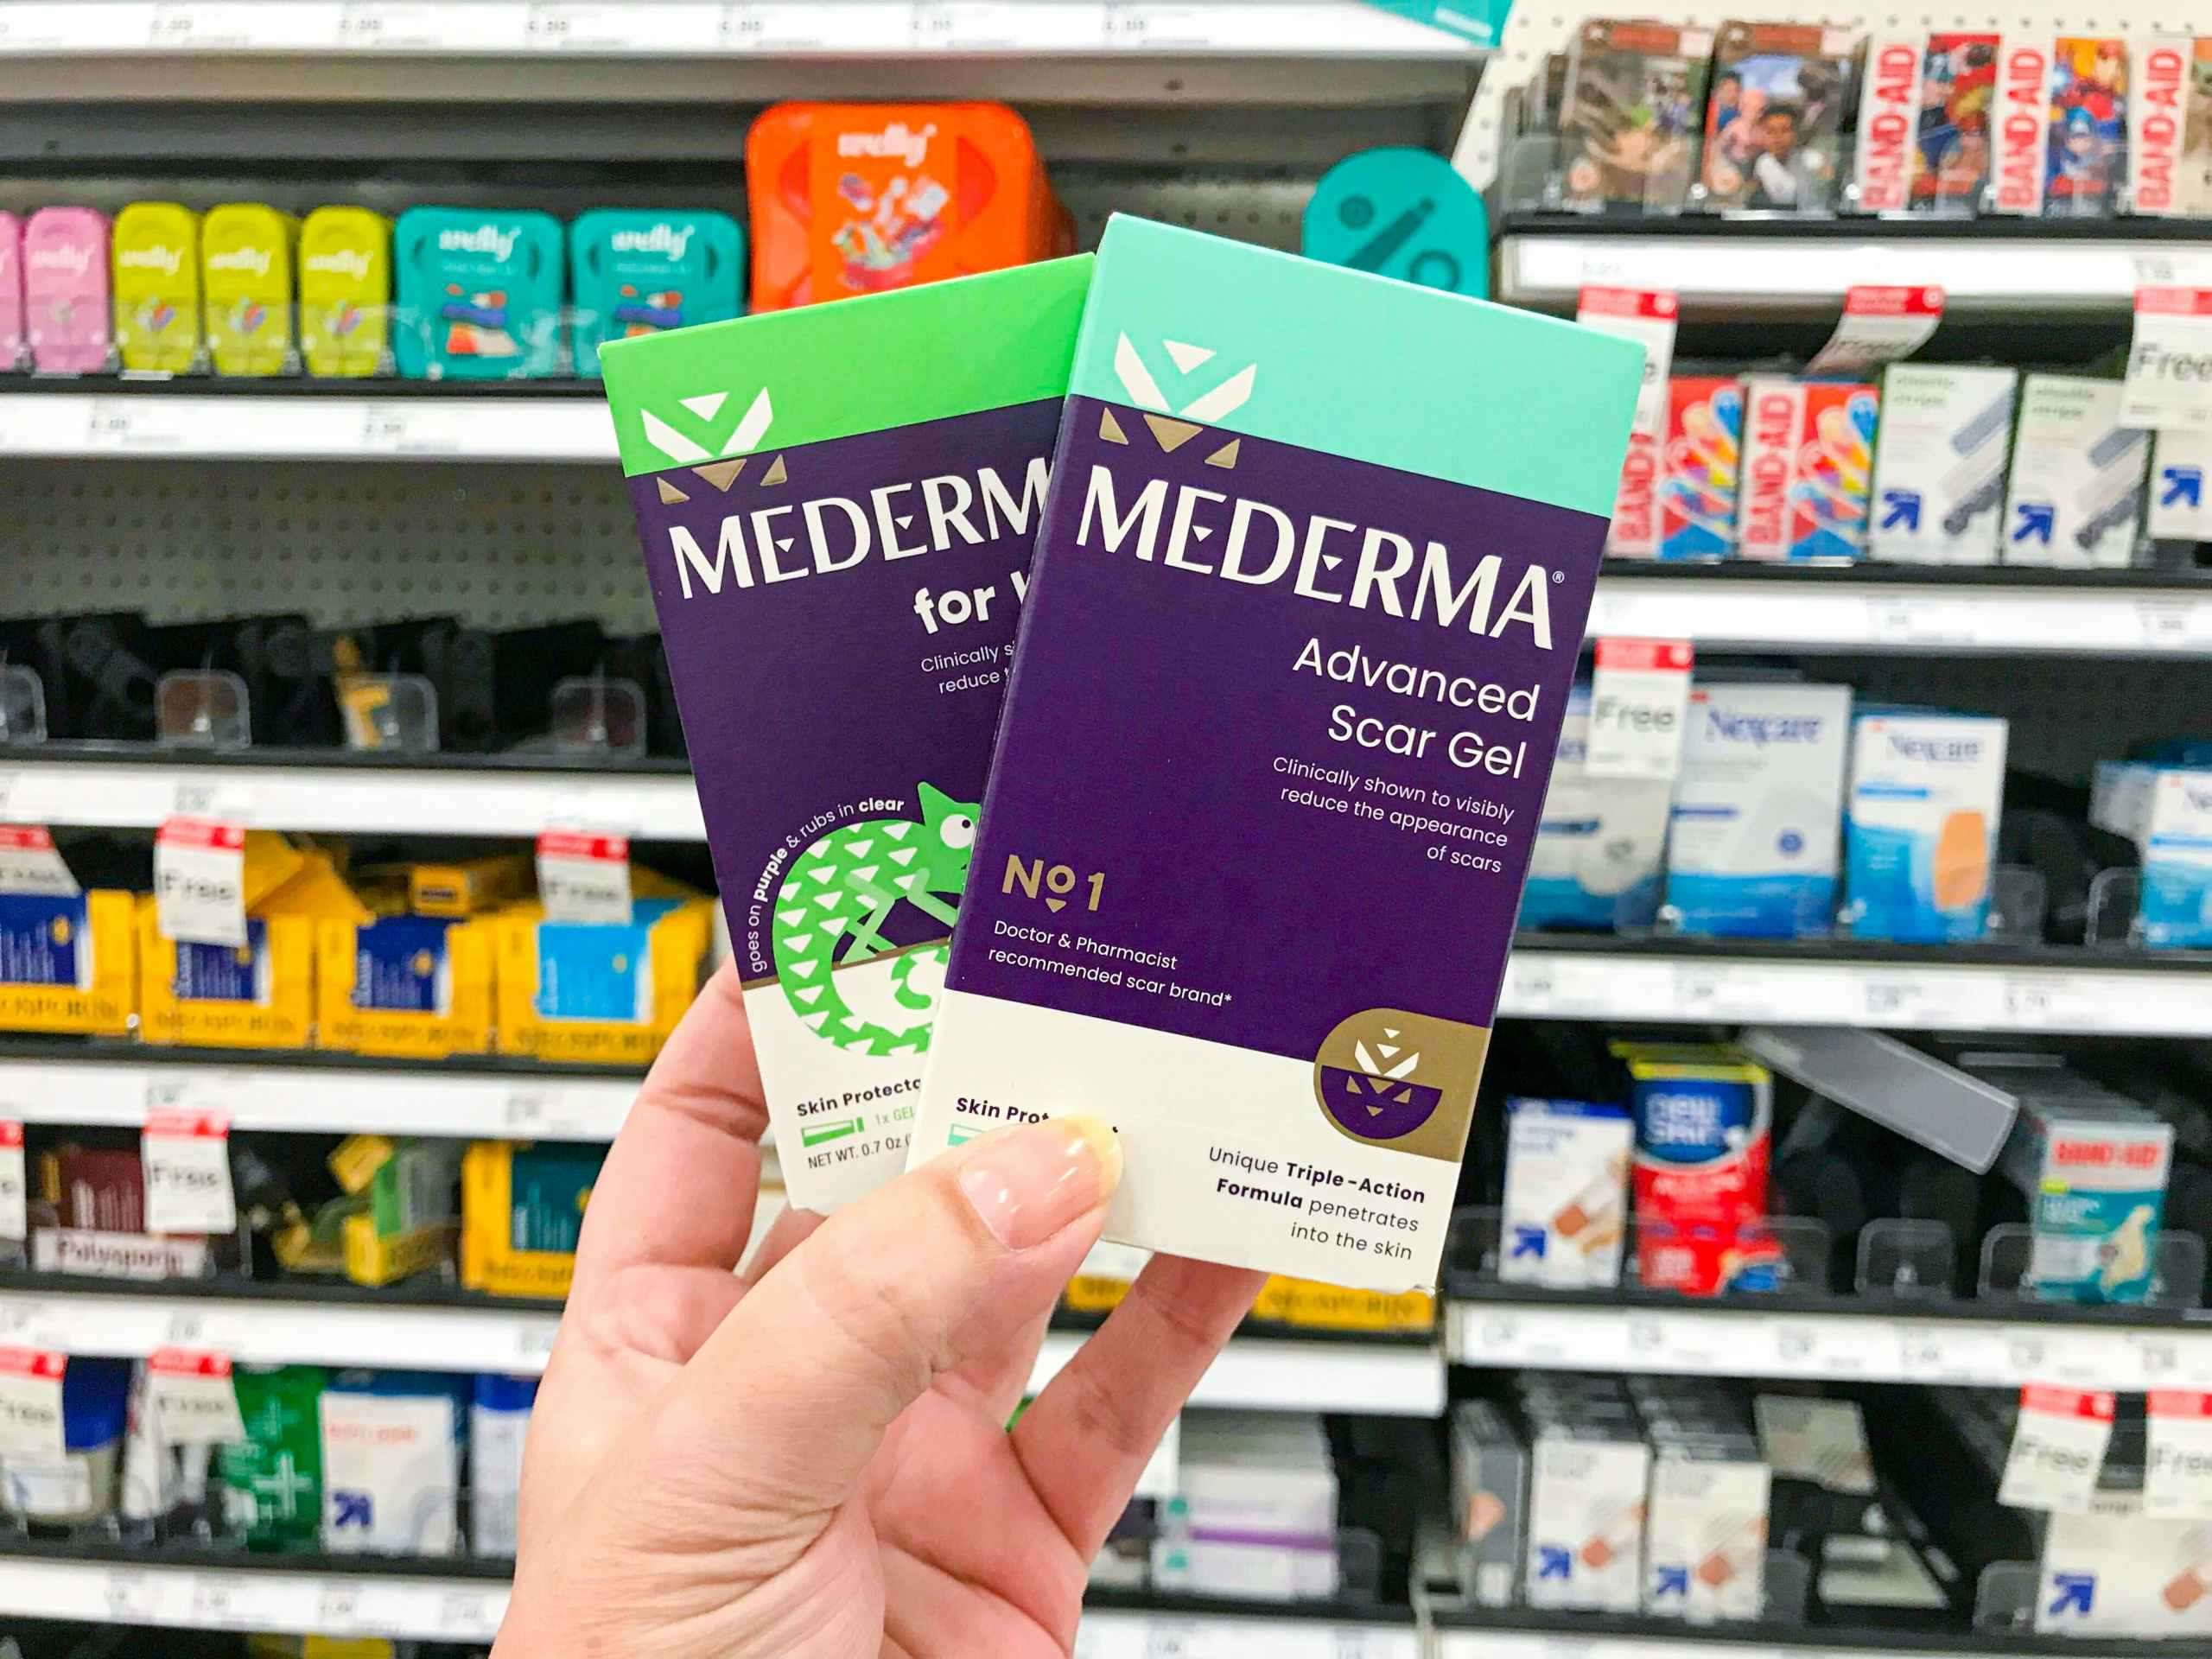 Mederma scar repair products with hand holding in front of Target shelf